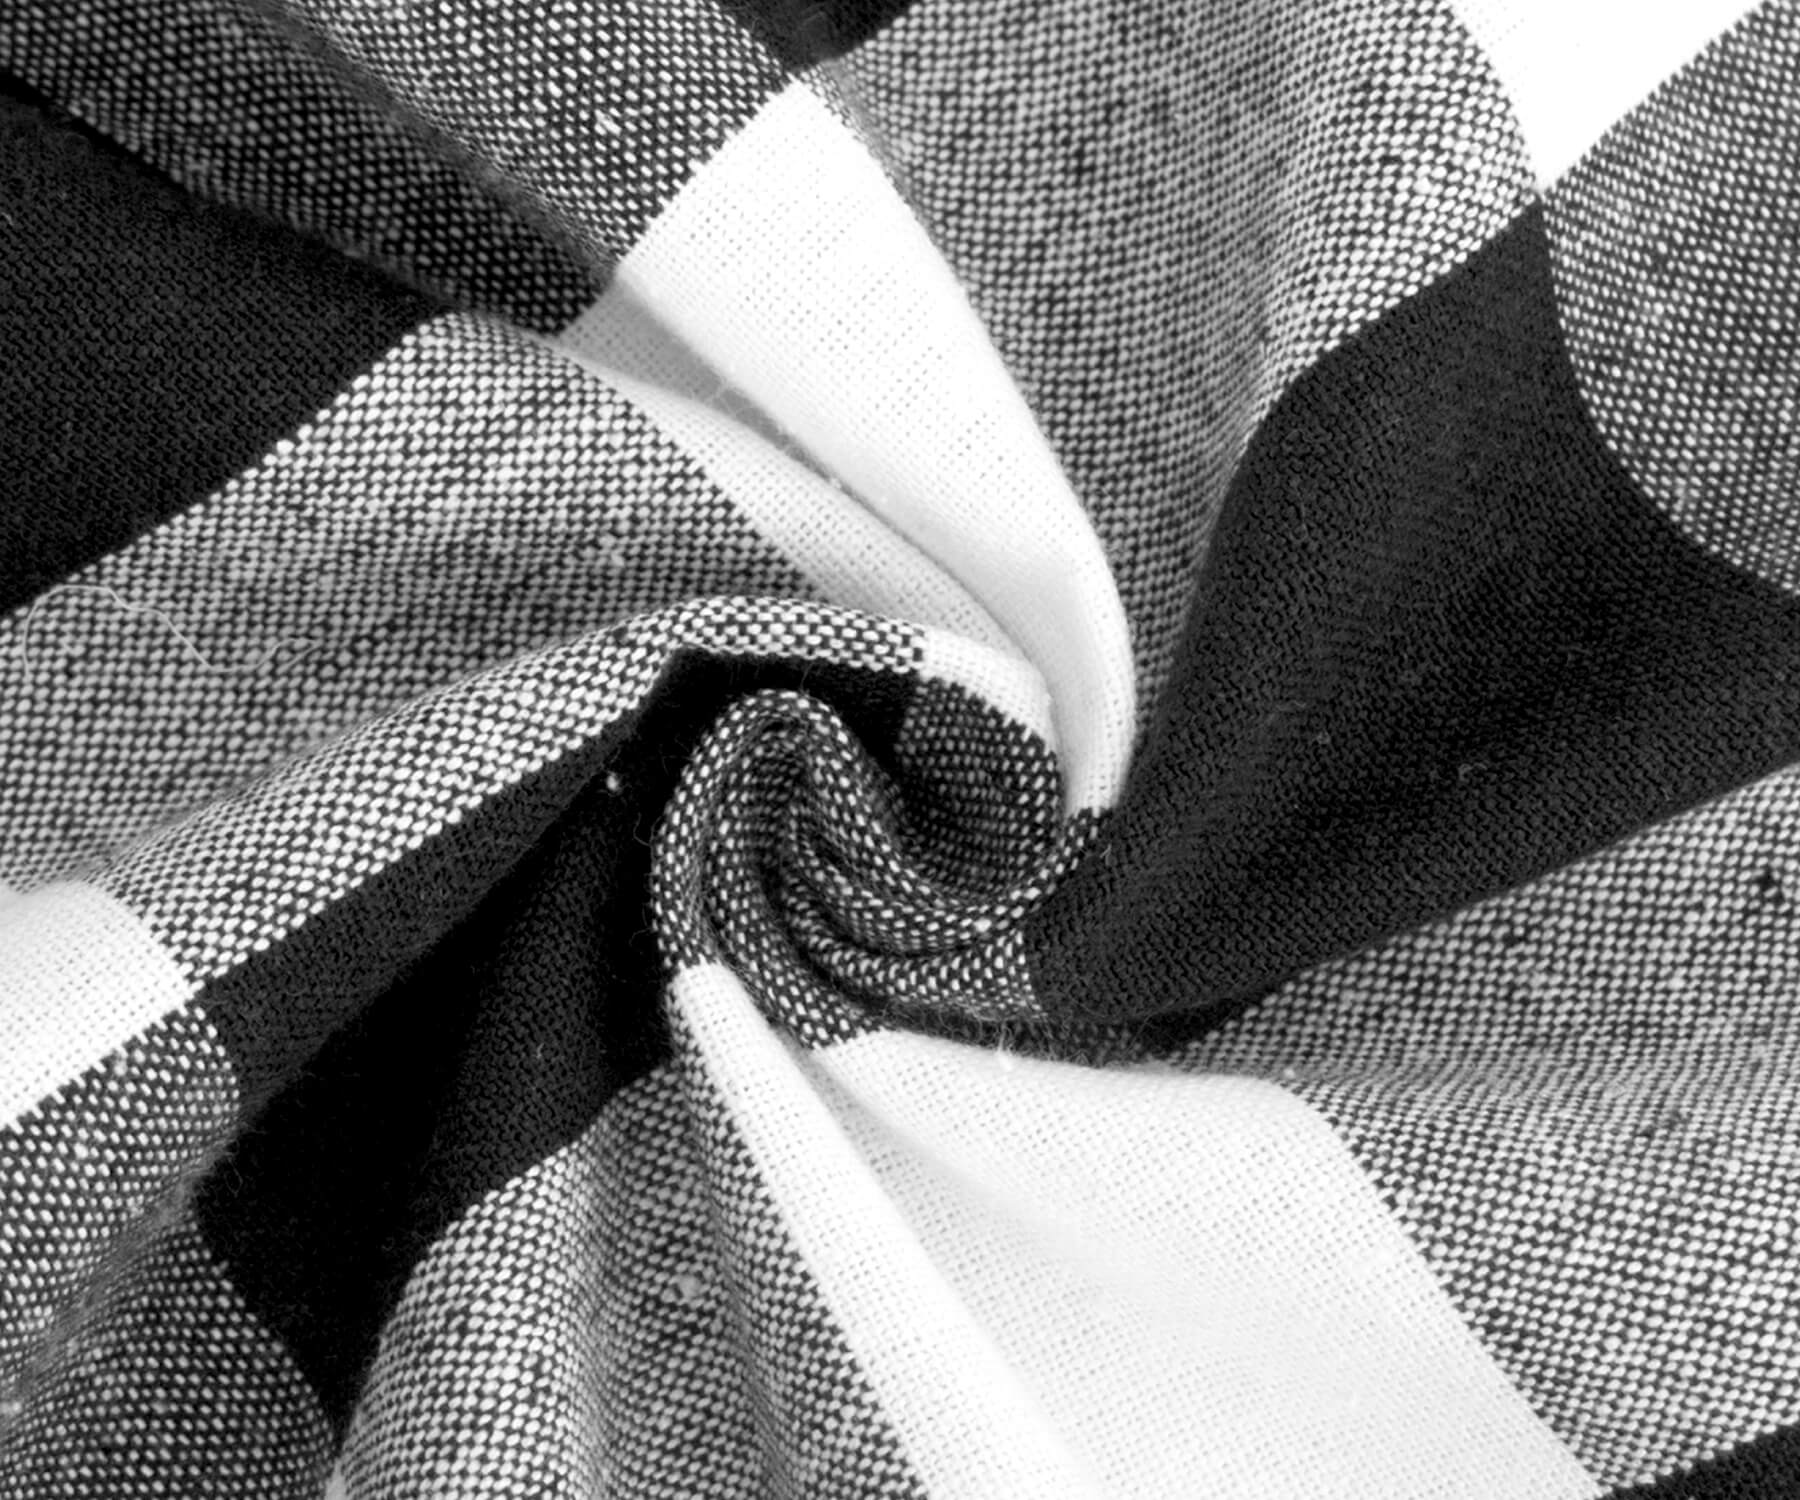 Black and white checkered round tablecloth fabric close-up